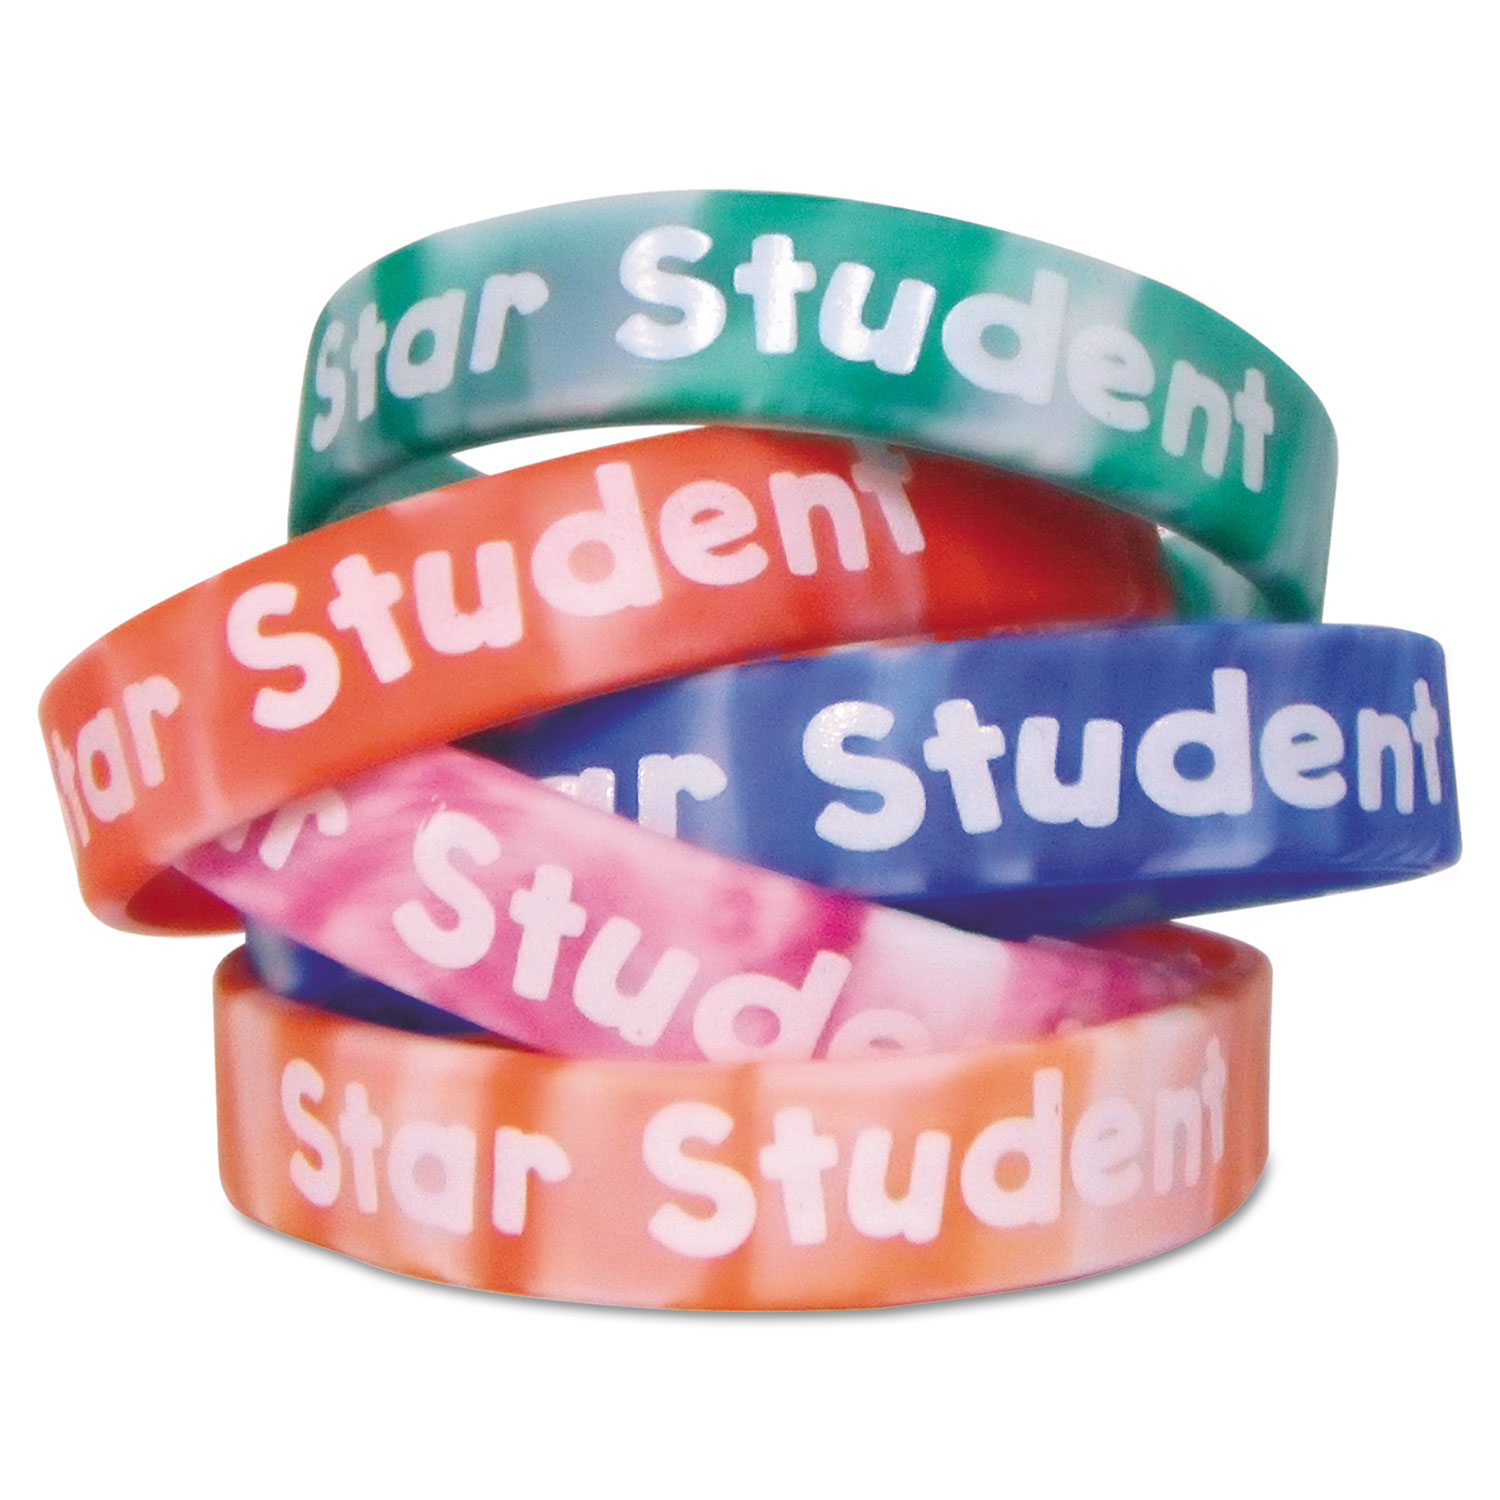 Teacher Created Resources Two-Toned Star Student Wristbands, 5 Designs, Assorted Colors, 10/Pack